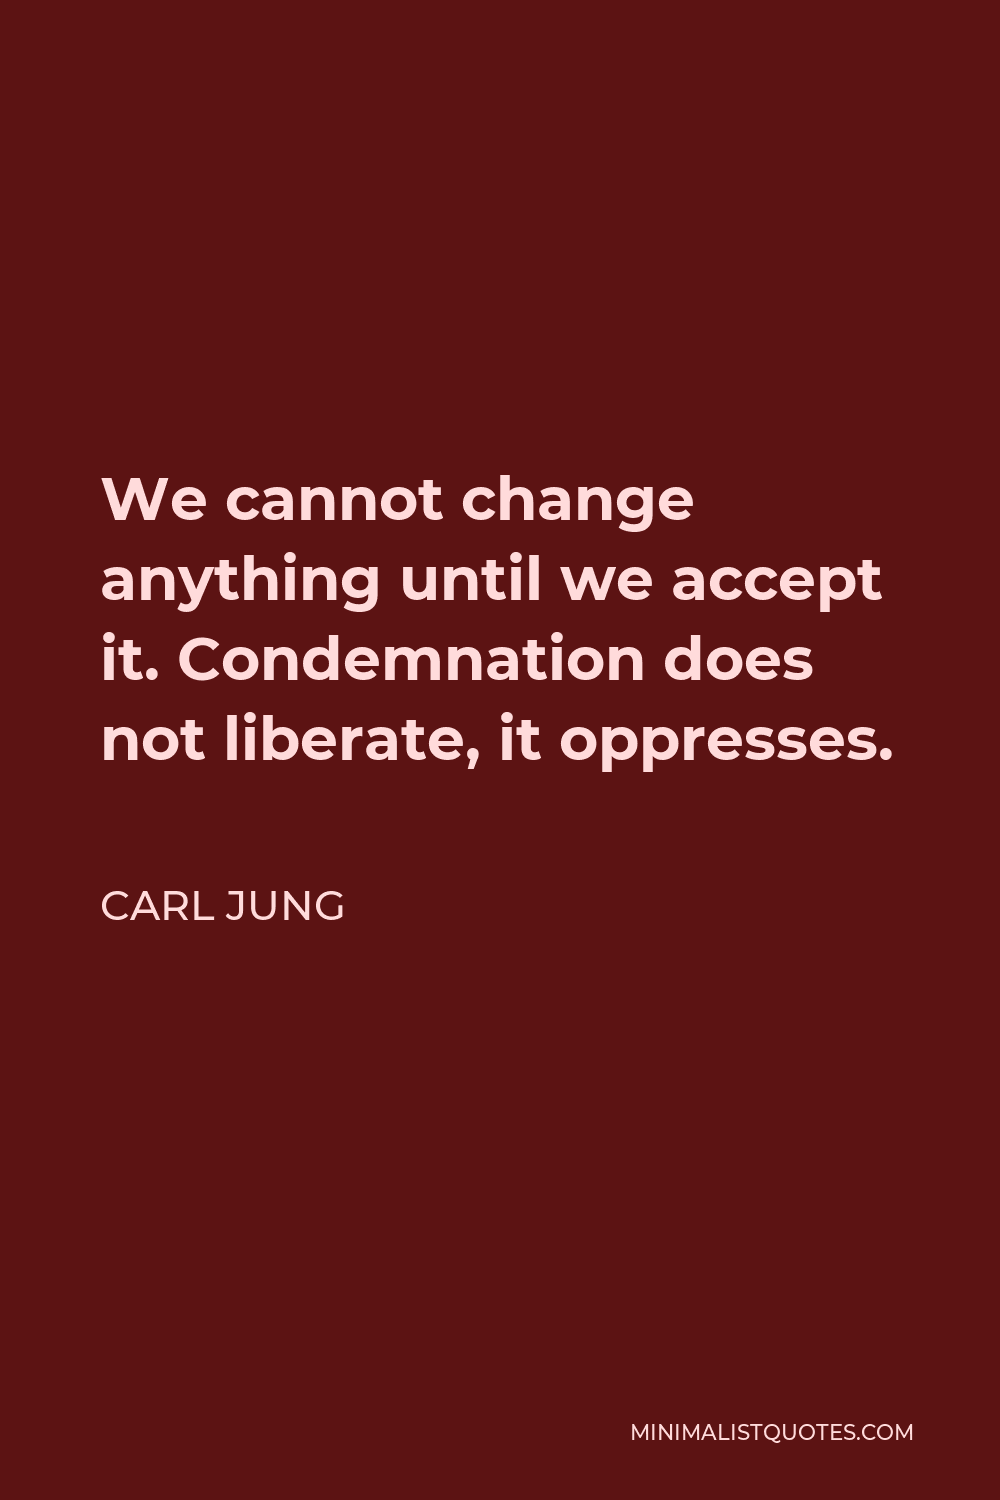 Carl Jung Quote - We cannot change anything until we accept it. Condemnation does not liberate, it oppresses.